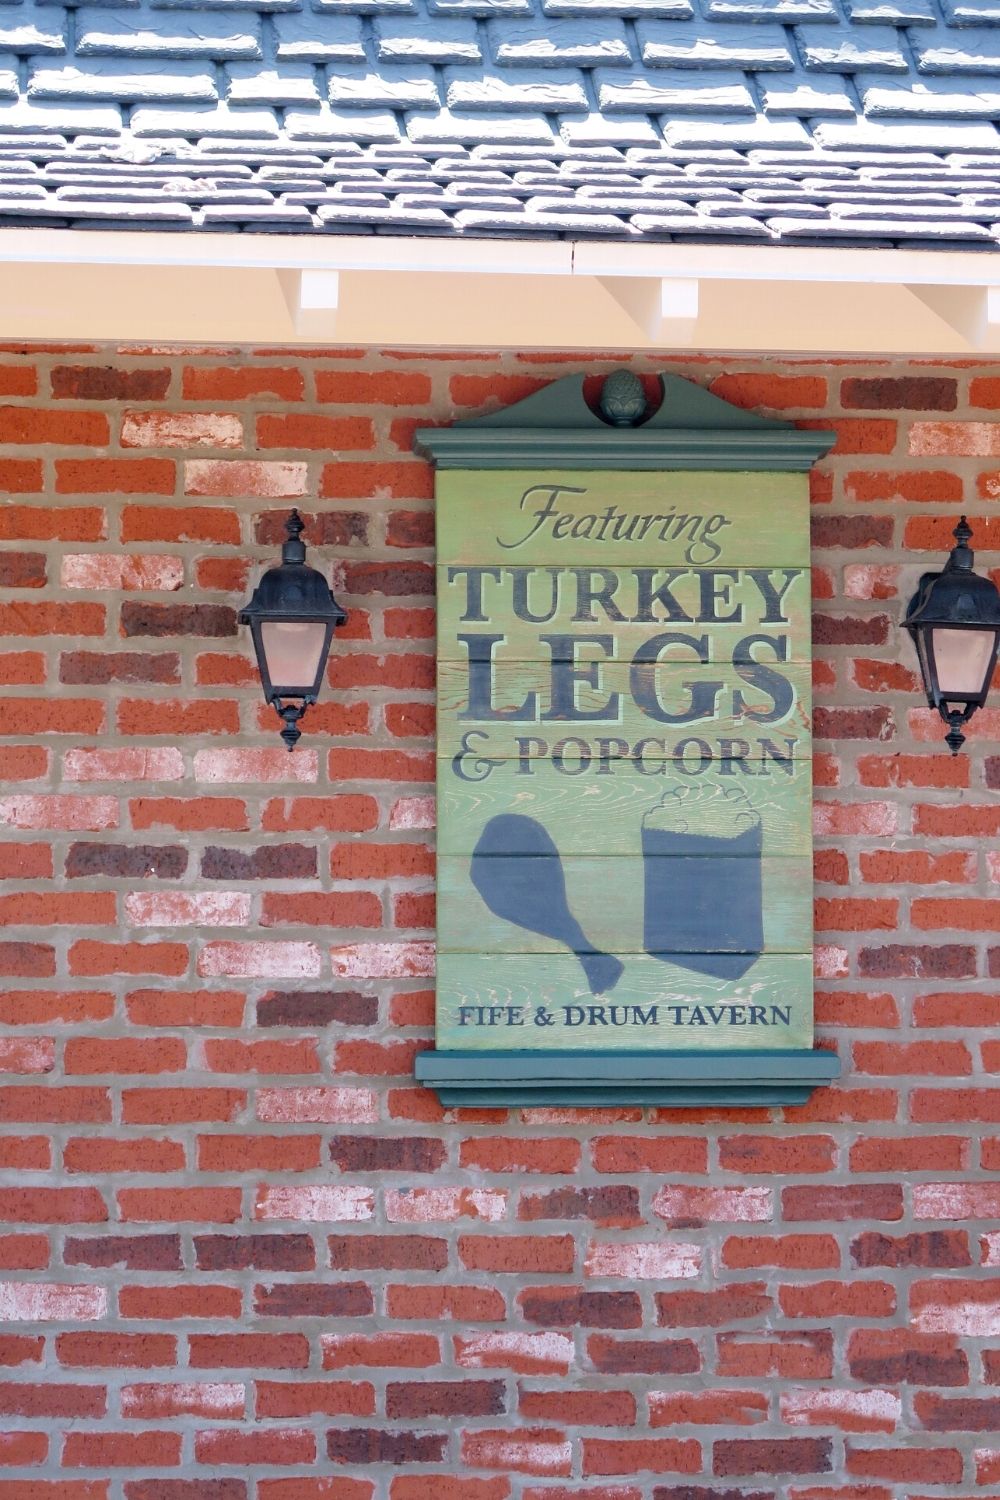 a sign at Epcot's Fife and Drum Tavern, advertising turkey legs and popcorn